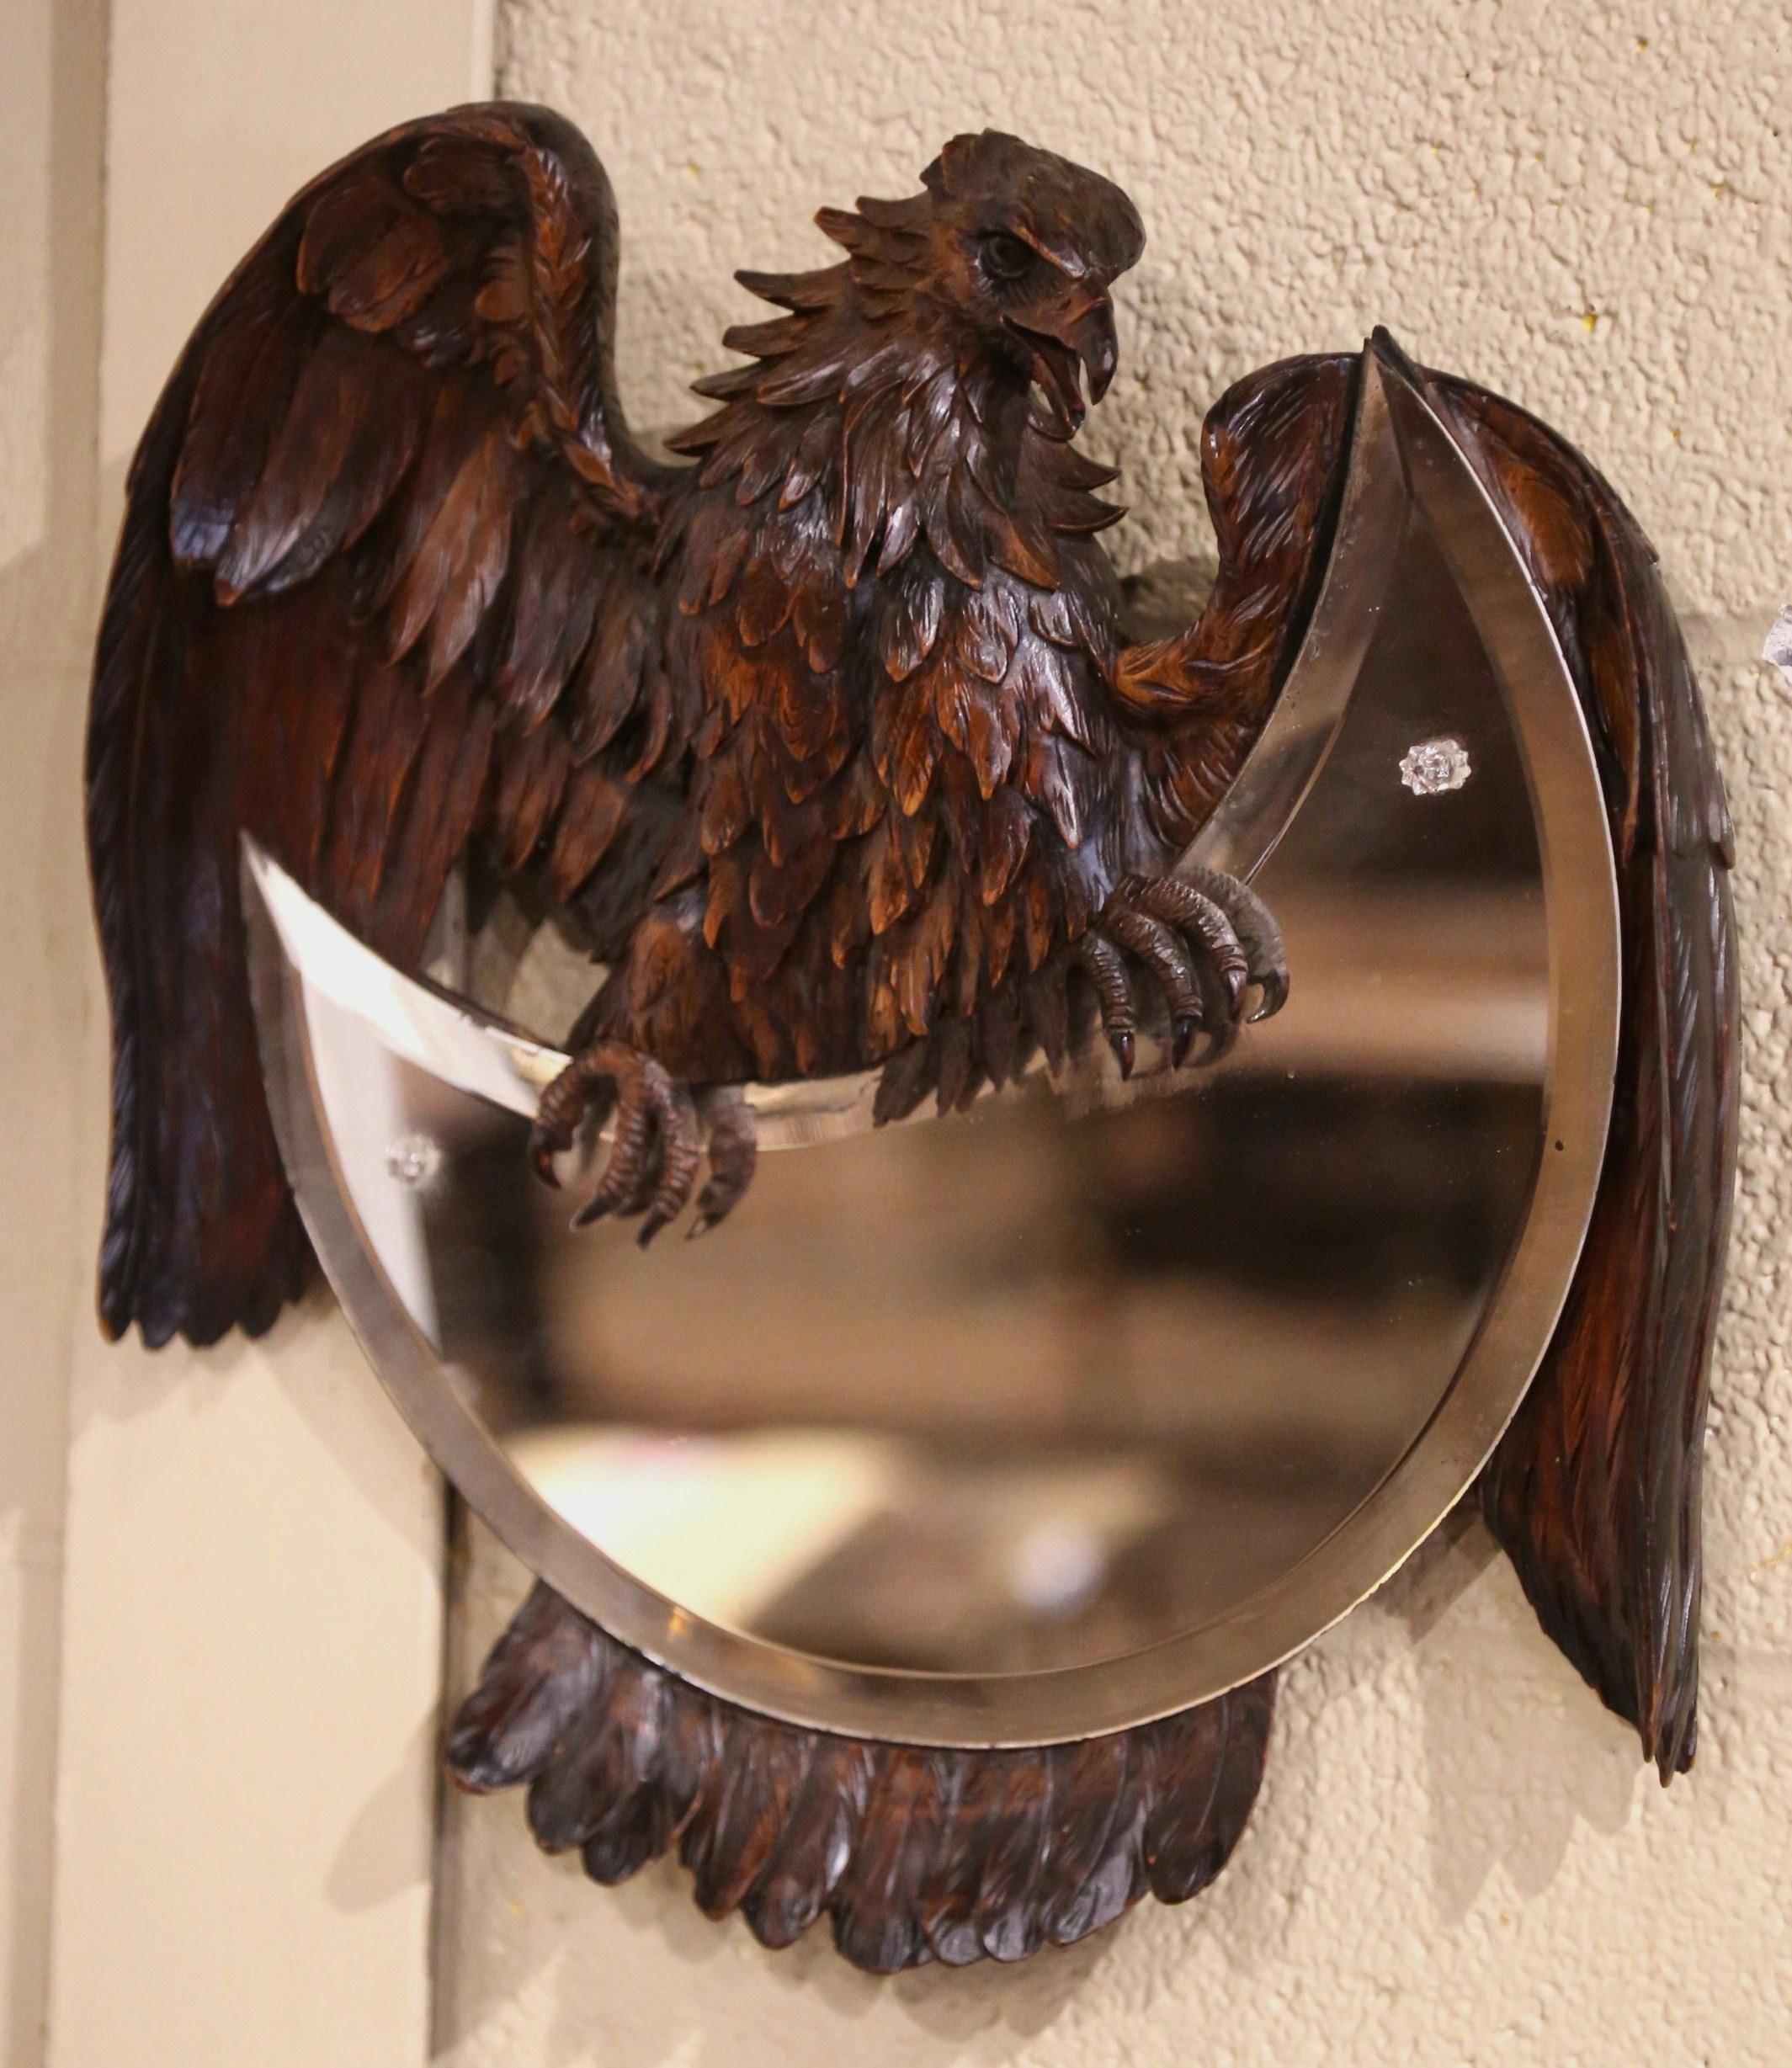 This unusual antique mirror was crafted in the Alps region of France, circa 1880. The whimsical mirror features a large eagle sculpture with wings and tail wrapped around a half moon mirror with beveled mercury glass. The bird features exquisite and